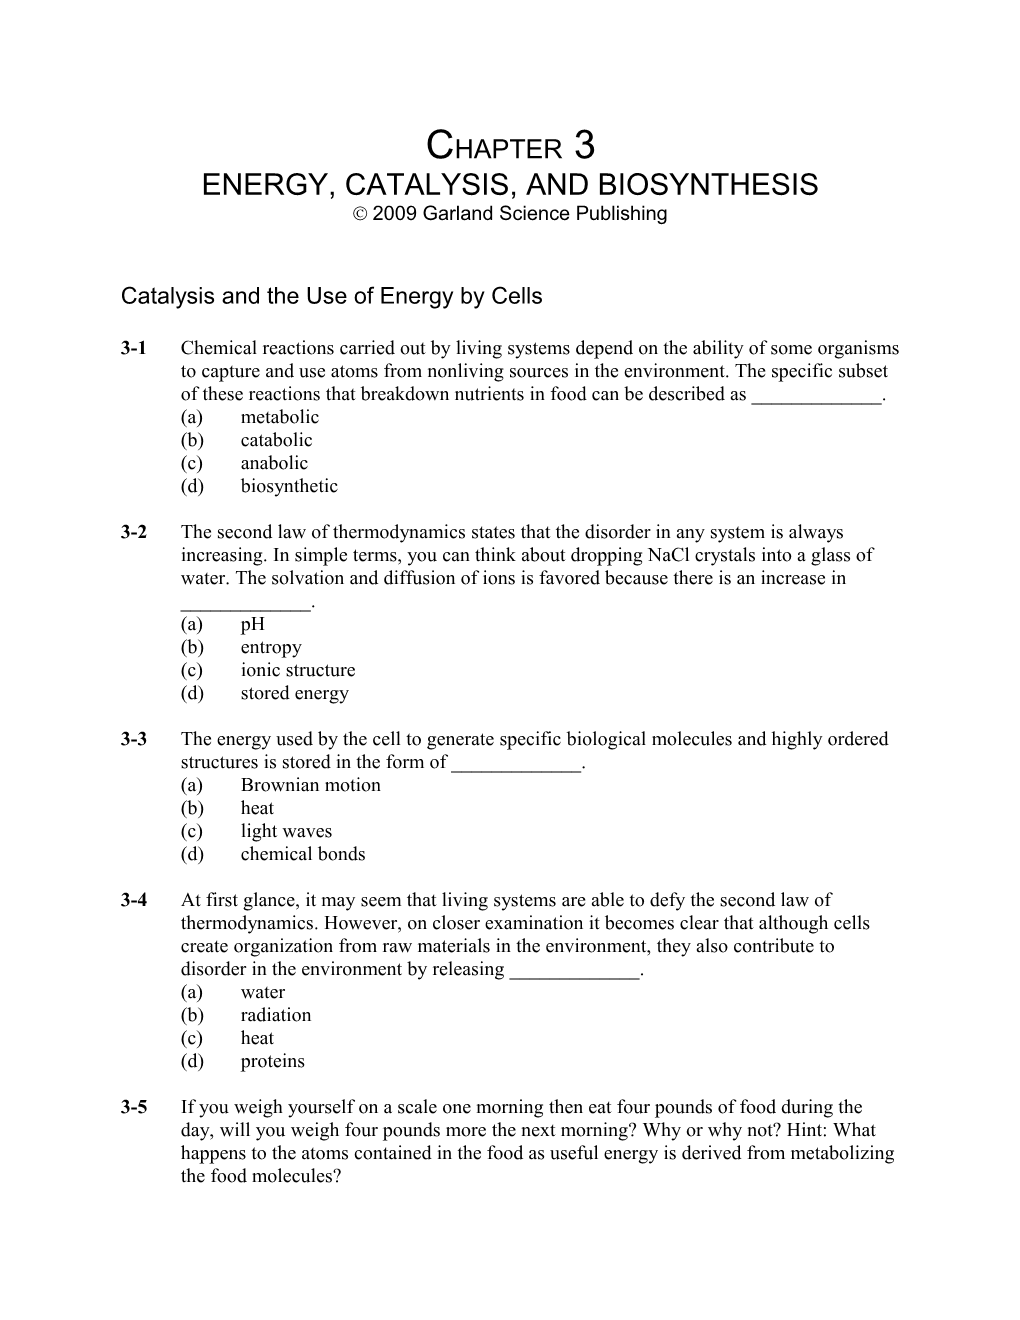 Chapter 3: Energy, Catalysis, and Biosynthesis s1